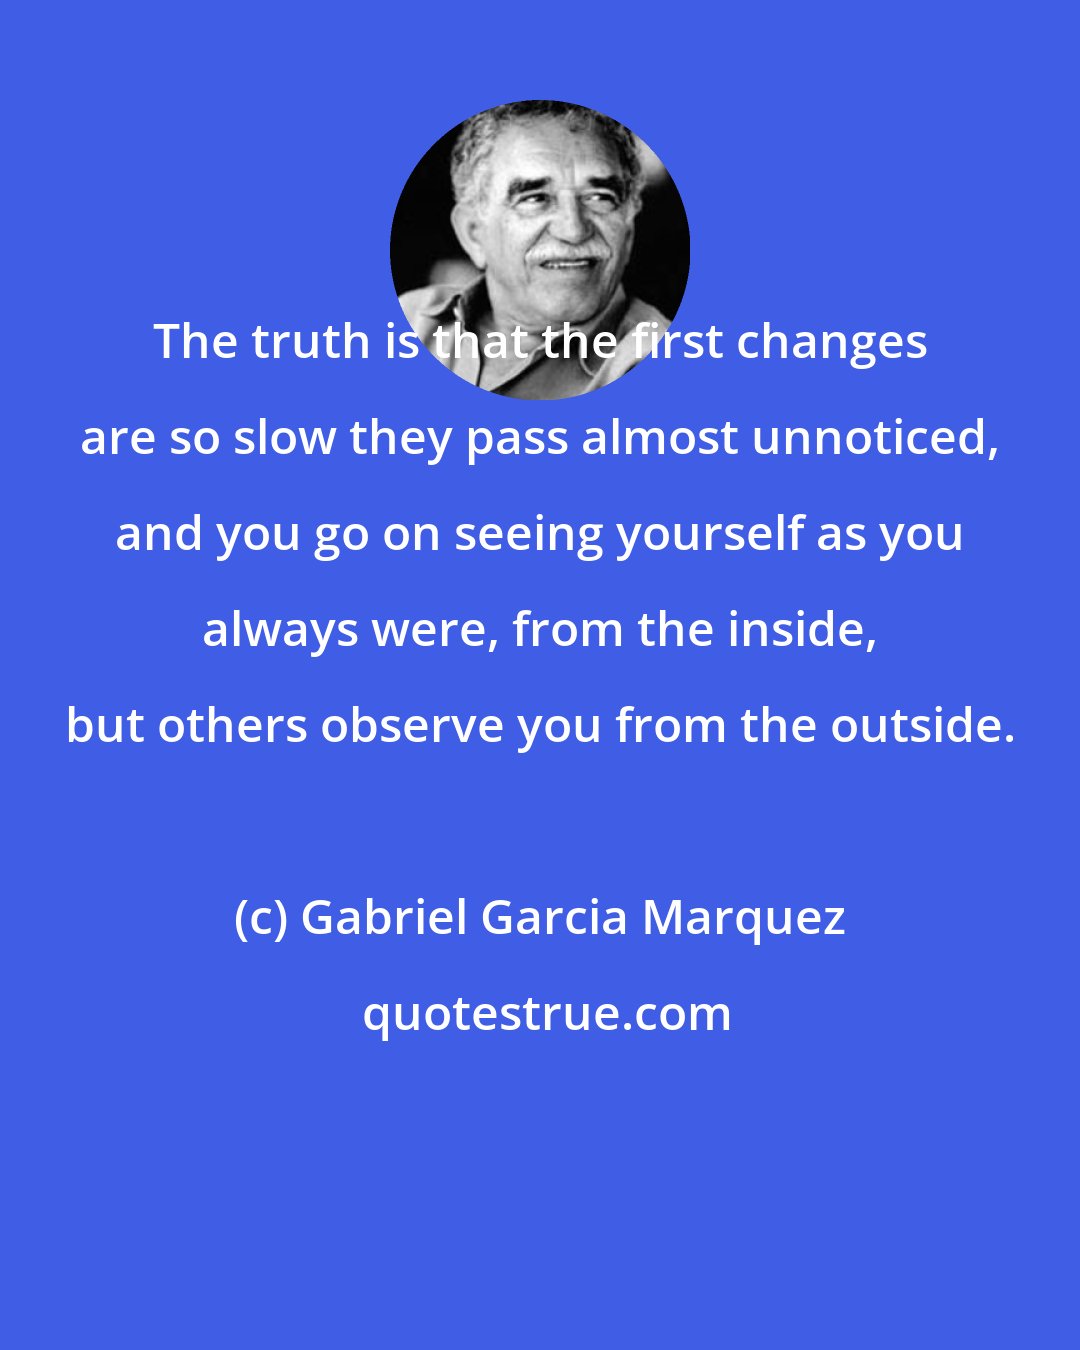 Gabriel Garcia Marquez: The truth is that the first changes are so slow they pass almost unnoticed, and you go on seeing yourself as you always were, from the inside, but others observe you from the outside.